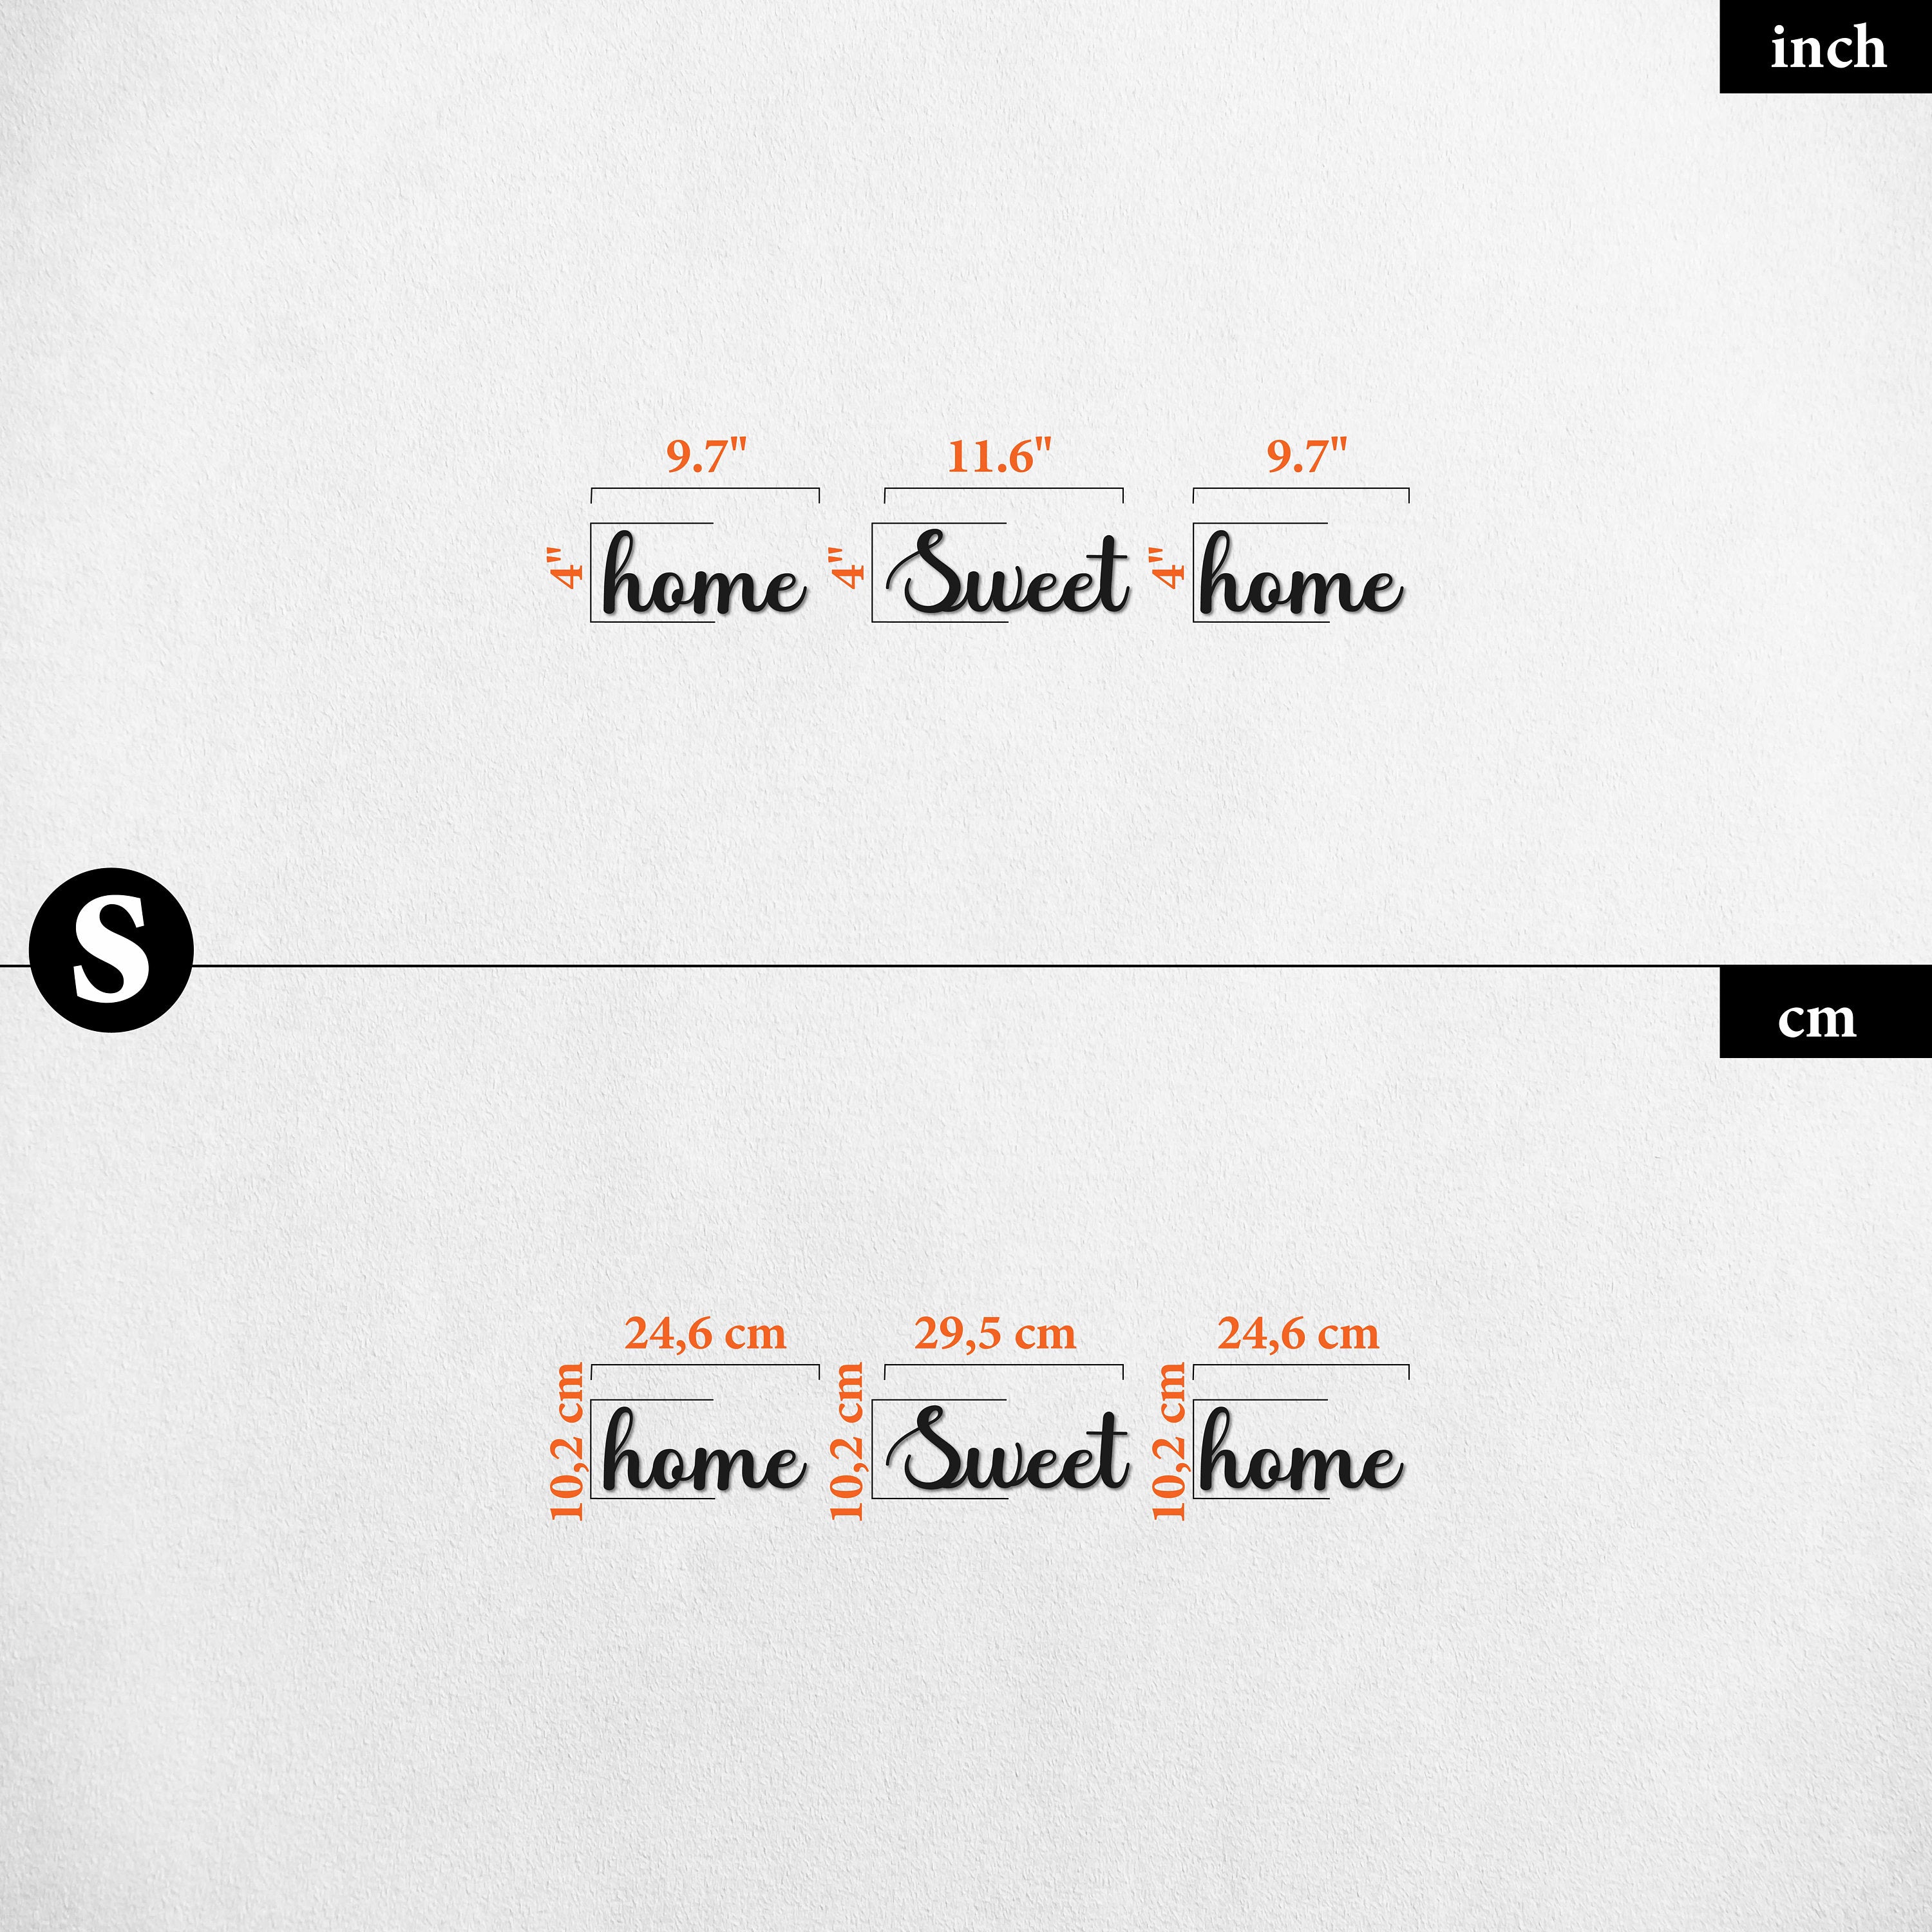 Home Sweet Home Sign, Metal Wall Art, Home Decor, Home Sweet Home Large Living Room Decoration, Interior Metal Wall Sign, Metal Wall Decor